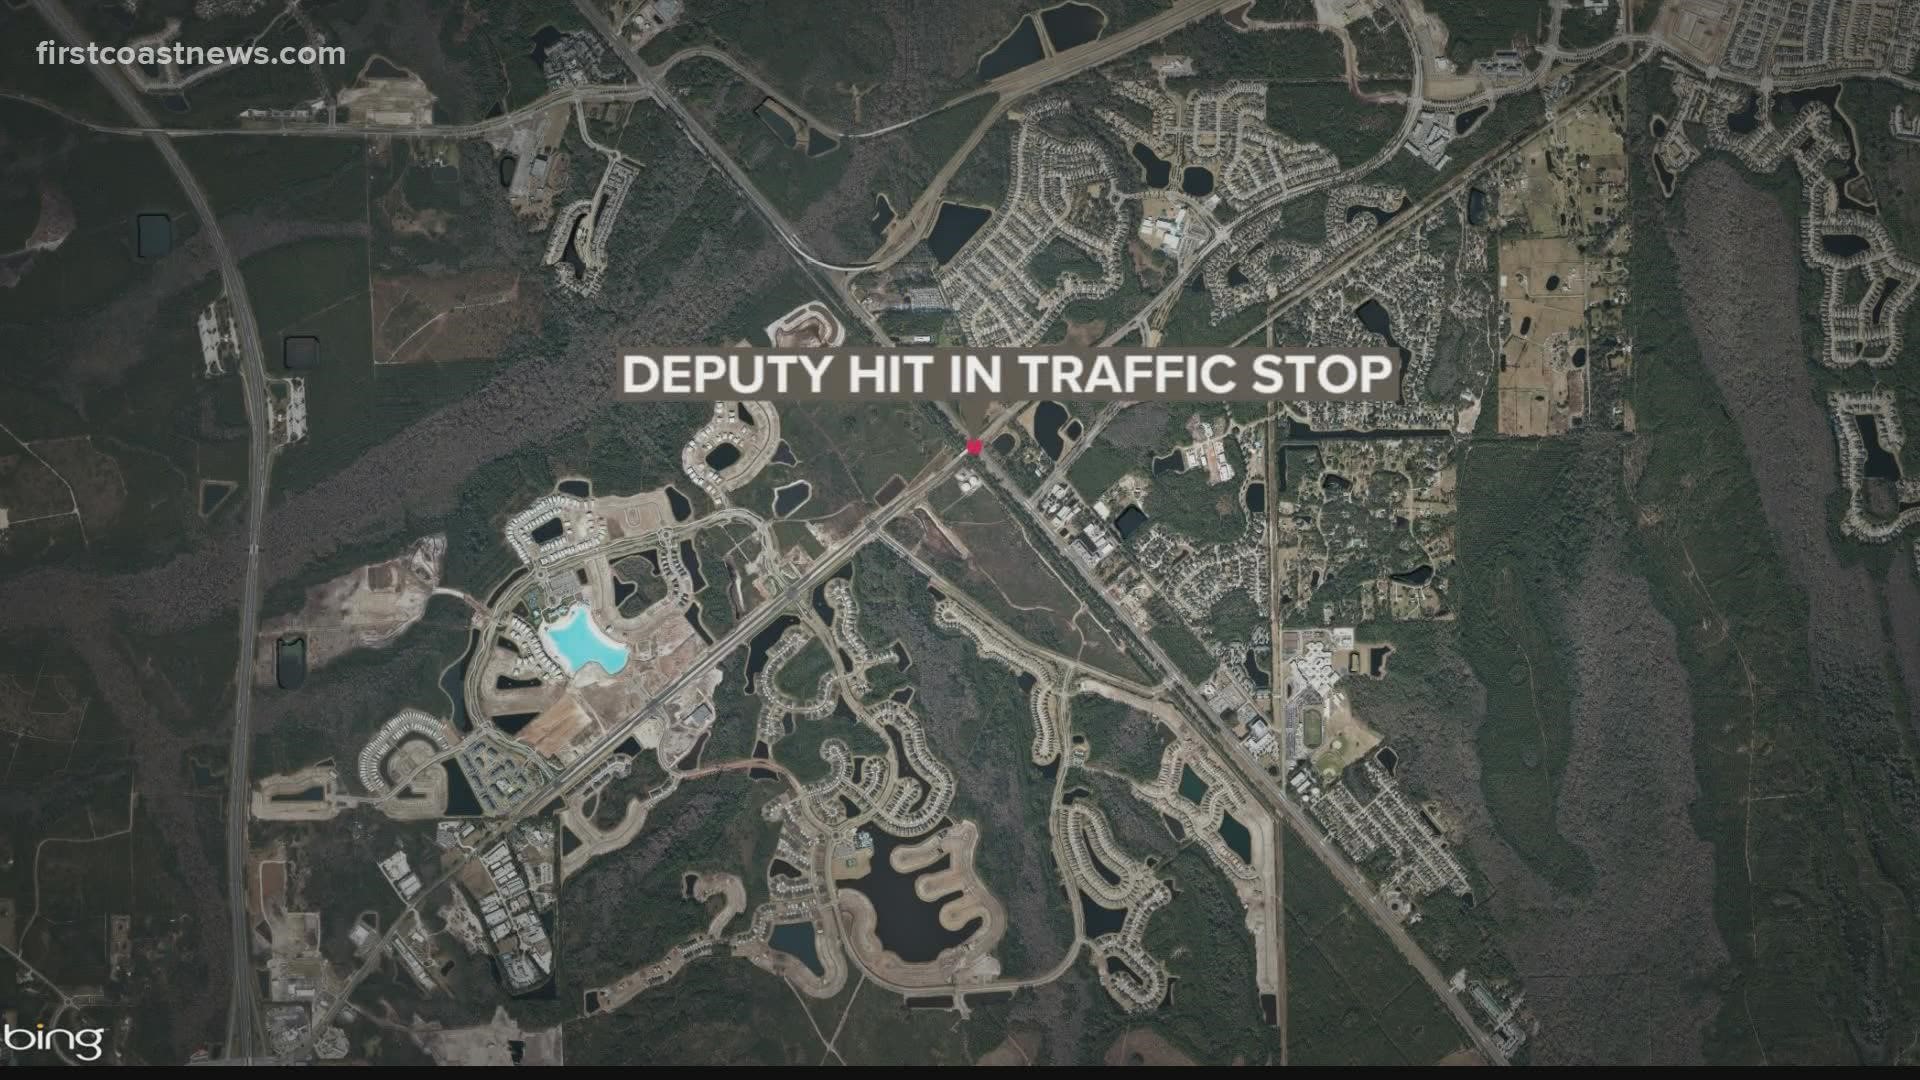 The deputy was conducting a traffic stop on US-1 near Valley Ridge in the northeast part of the county.